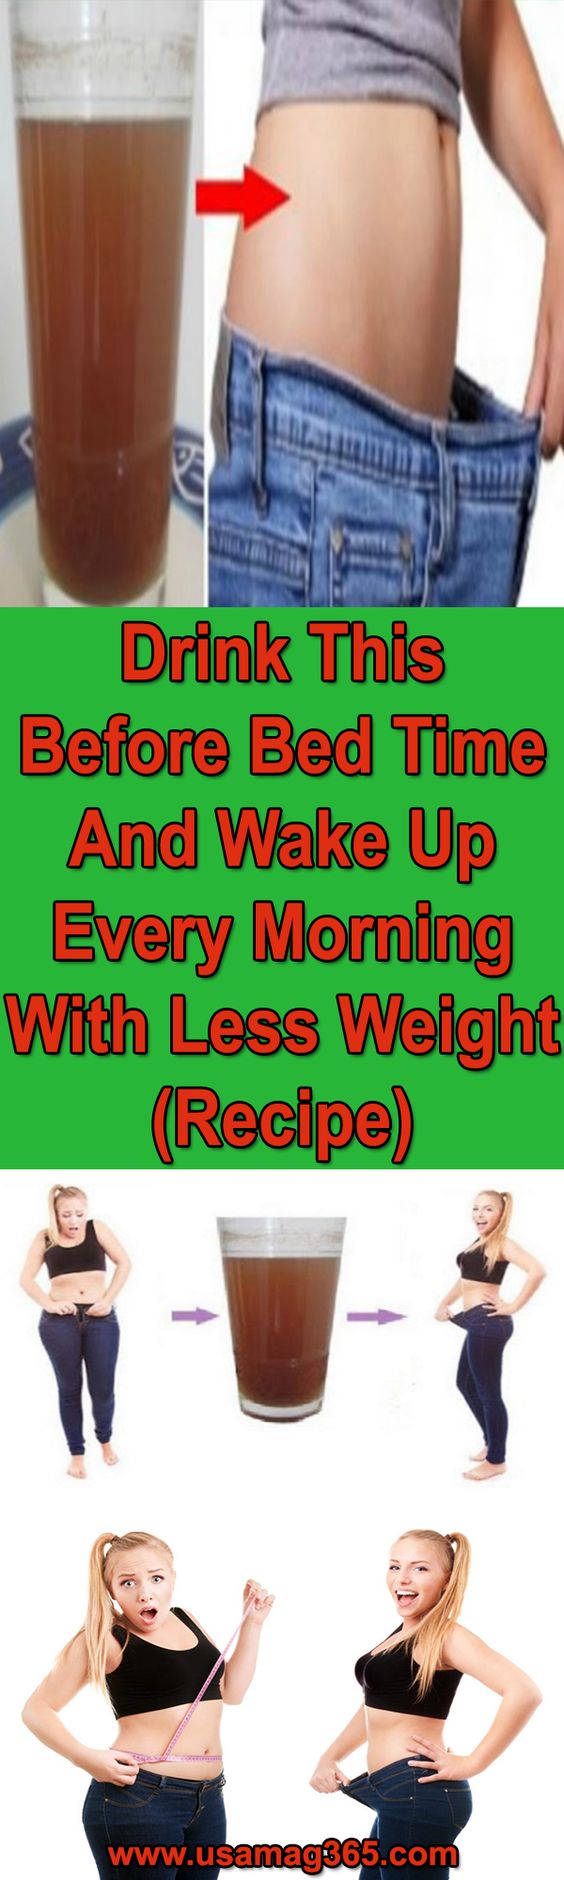 Drink This Before Bedtime And Wake Up Every Morning With Less Weight